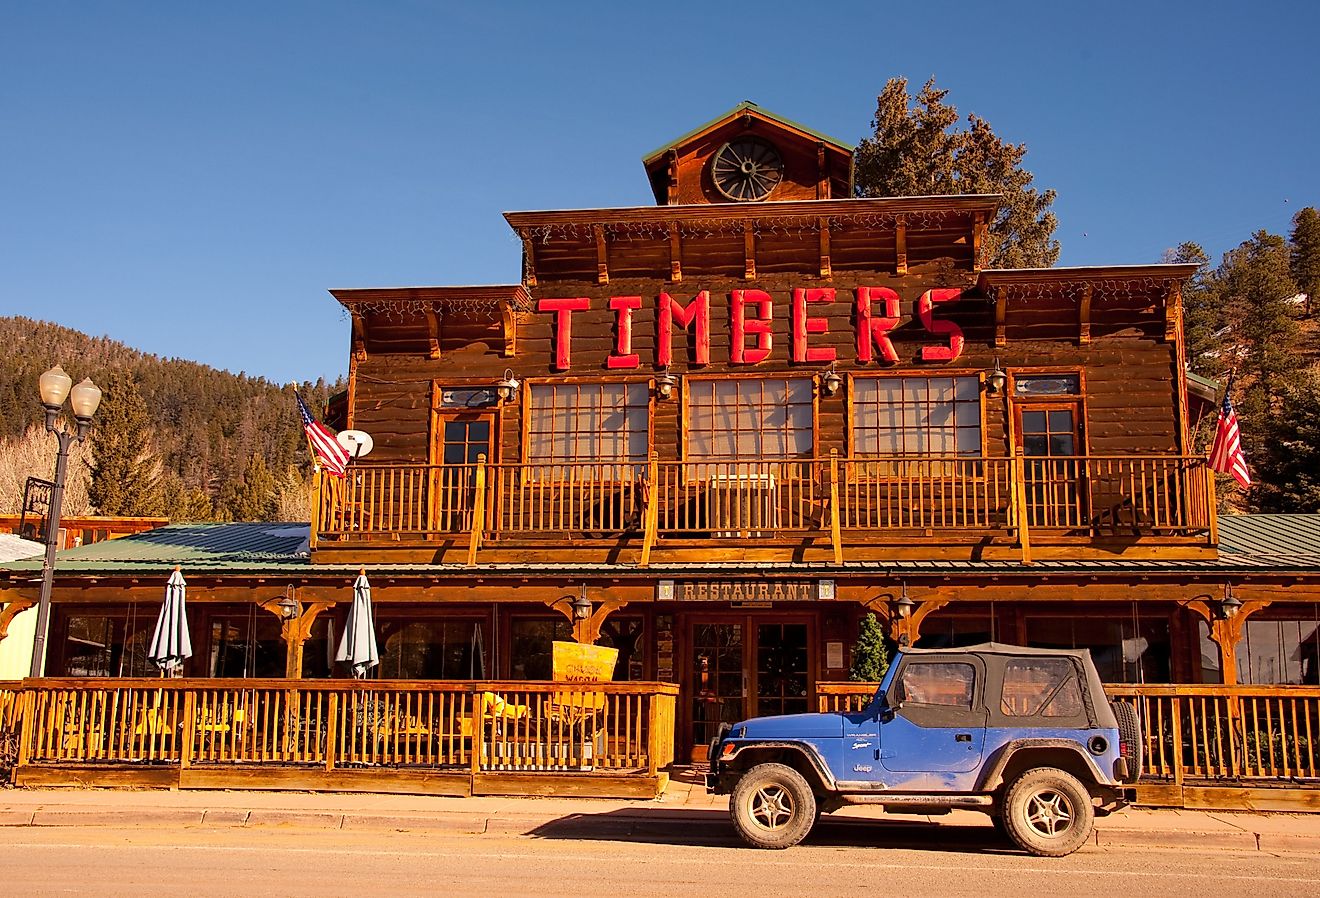 Timbers Restaurant, a steakhouse on W Main St in downtown Red River, New Mexico.